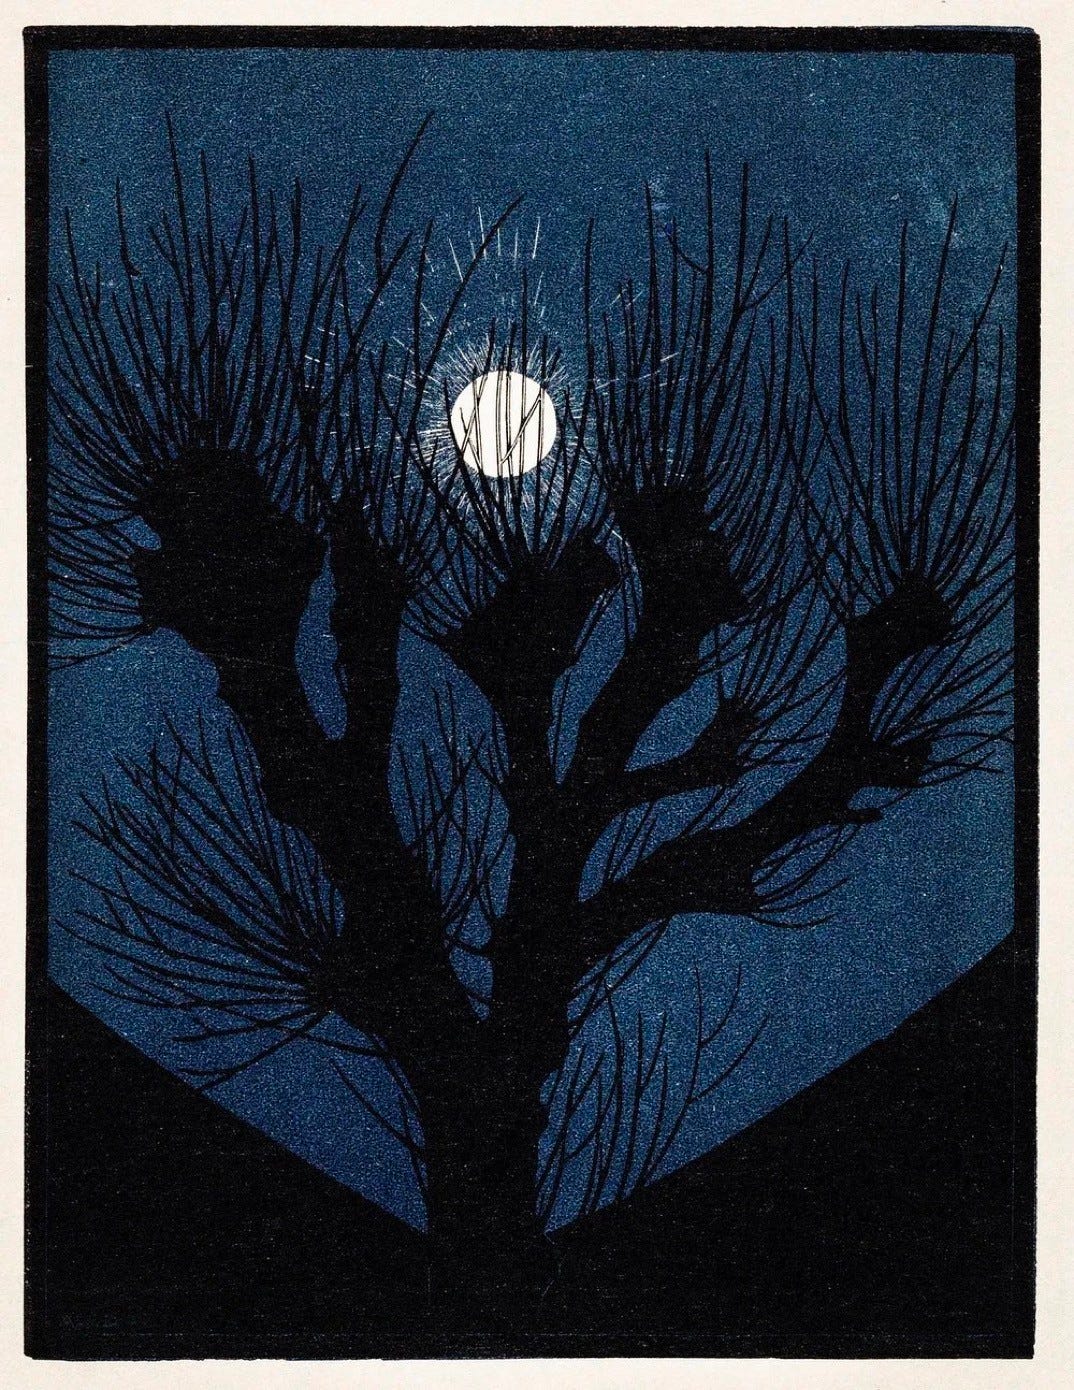 A dark midnight blue sky with a leafless polled tree with a bright full moon shining through the branches